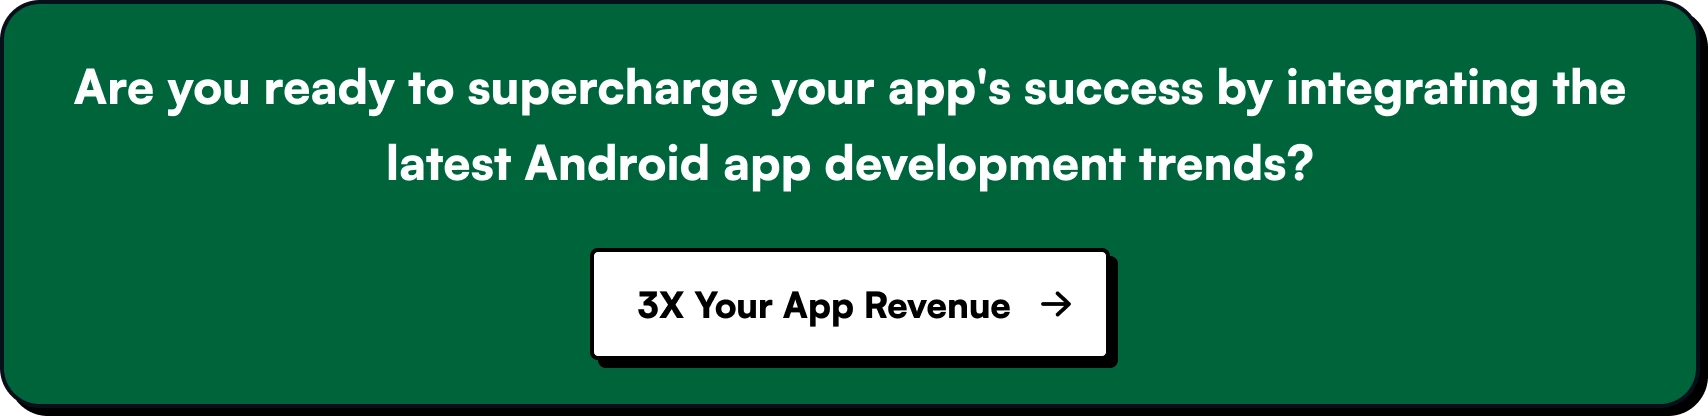 Are you ready to supercharge your app's success by integrating the latest Android app development trends